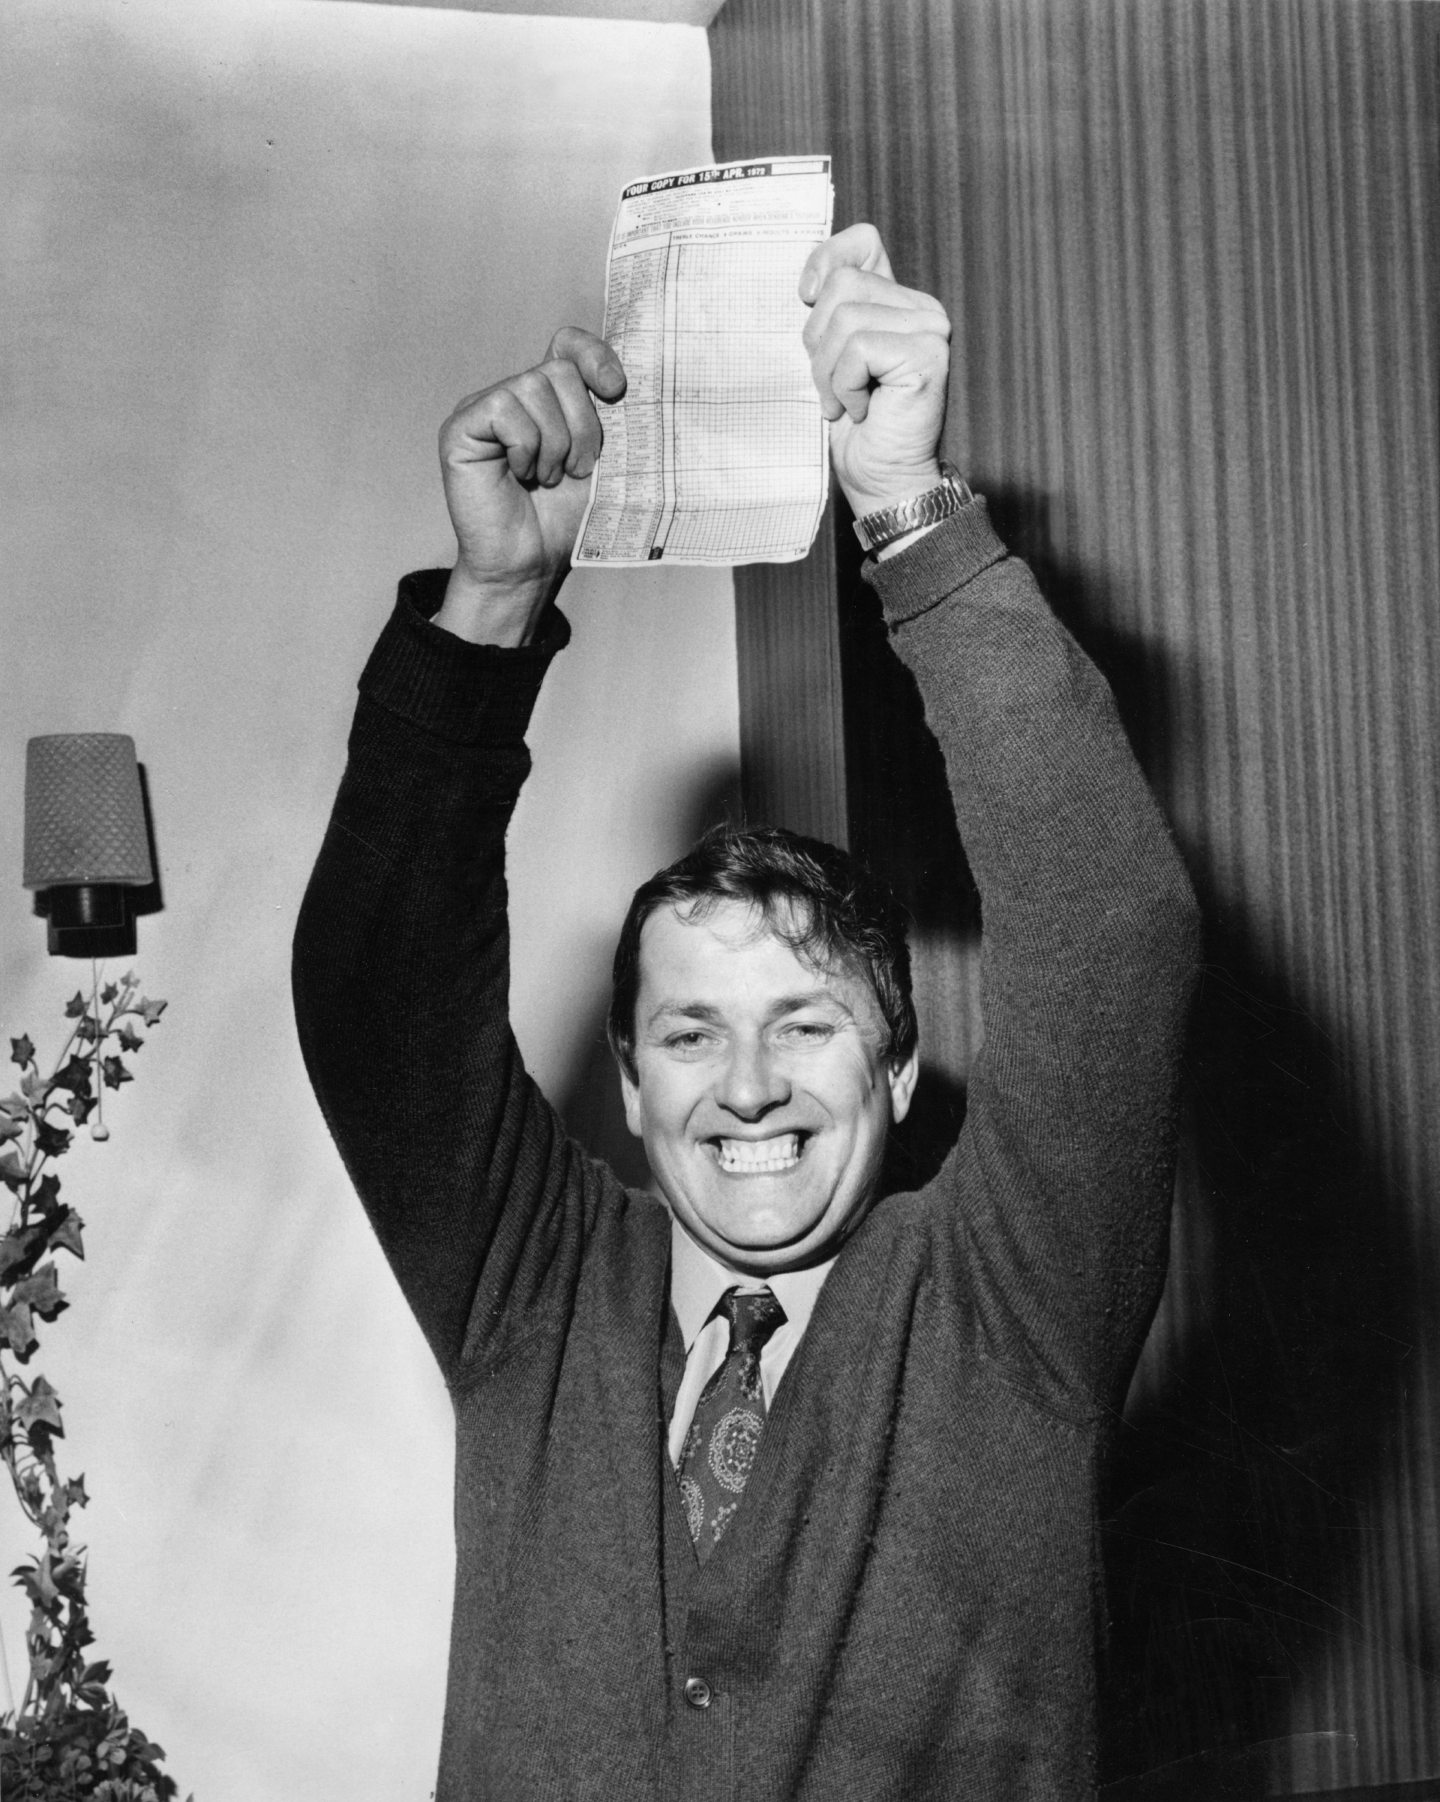 A smiling Harry Yorston holds his coupon above his head, like a trophy